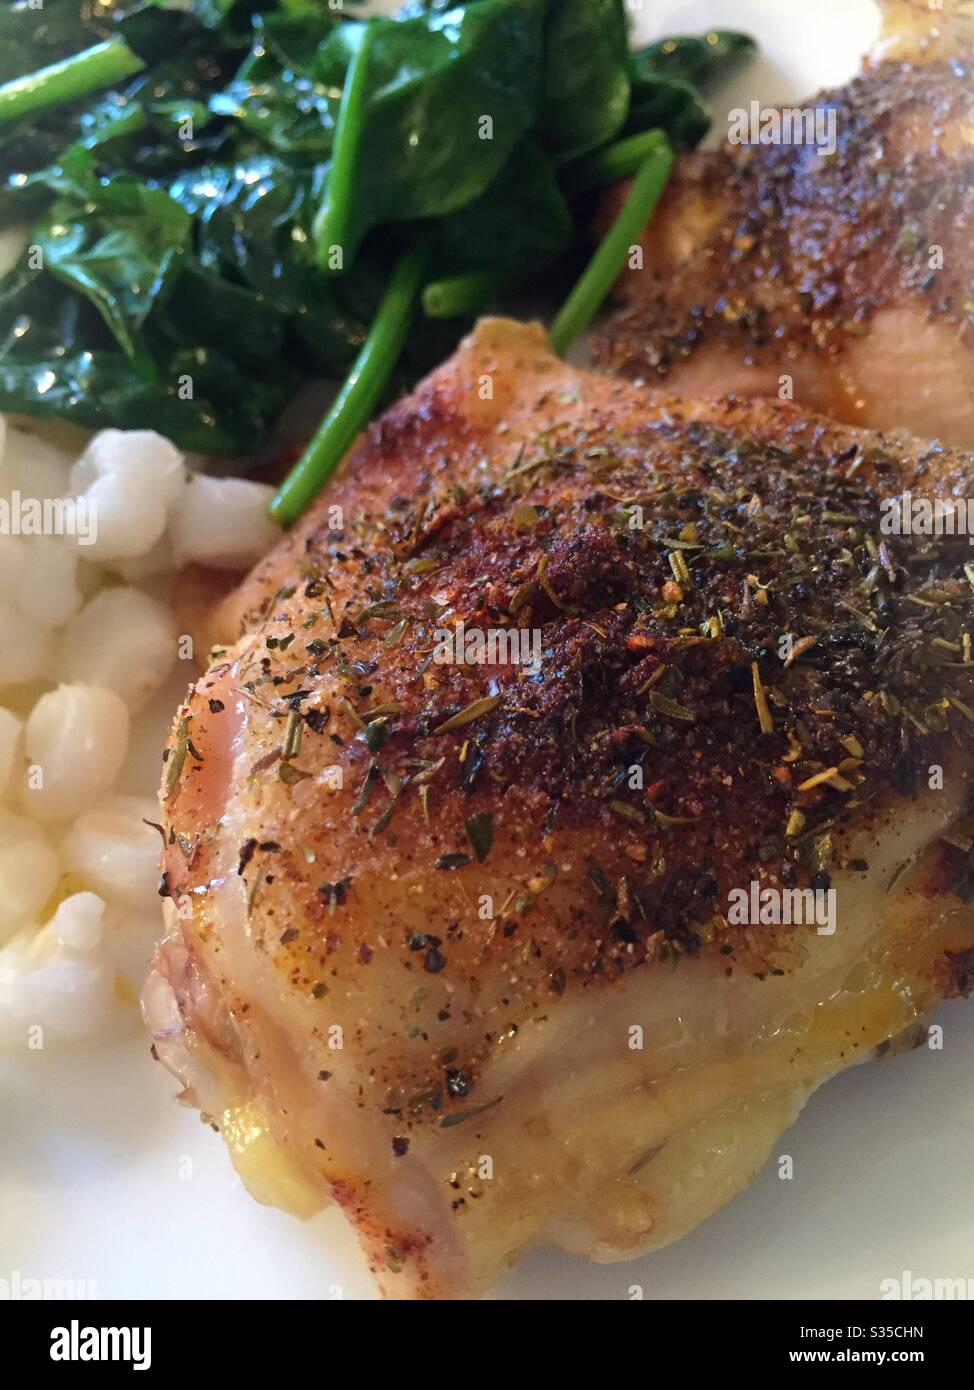 Close up of a balanced meal of chicken thighs sautéed spinach and hominy grits Stock Photo